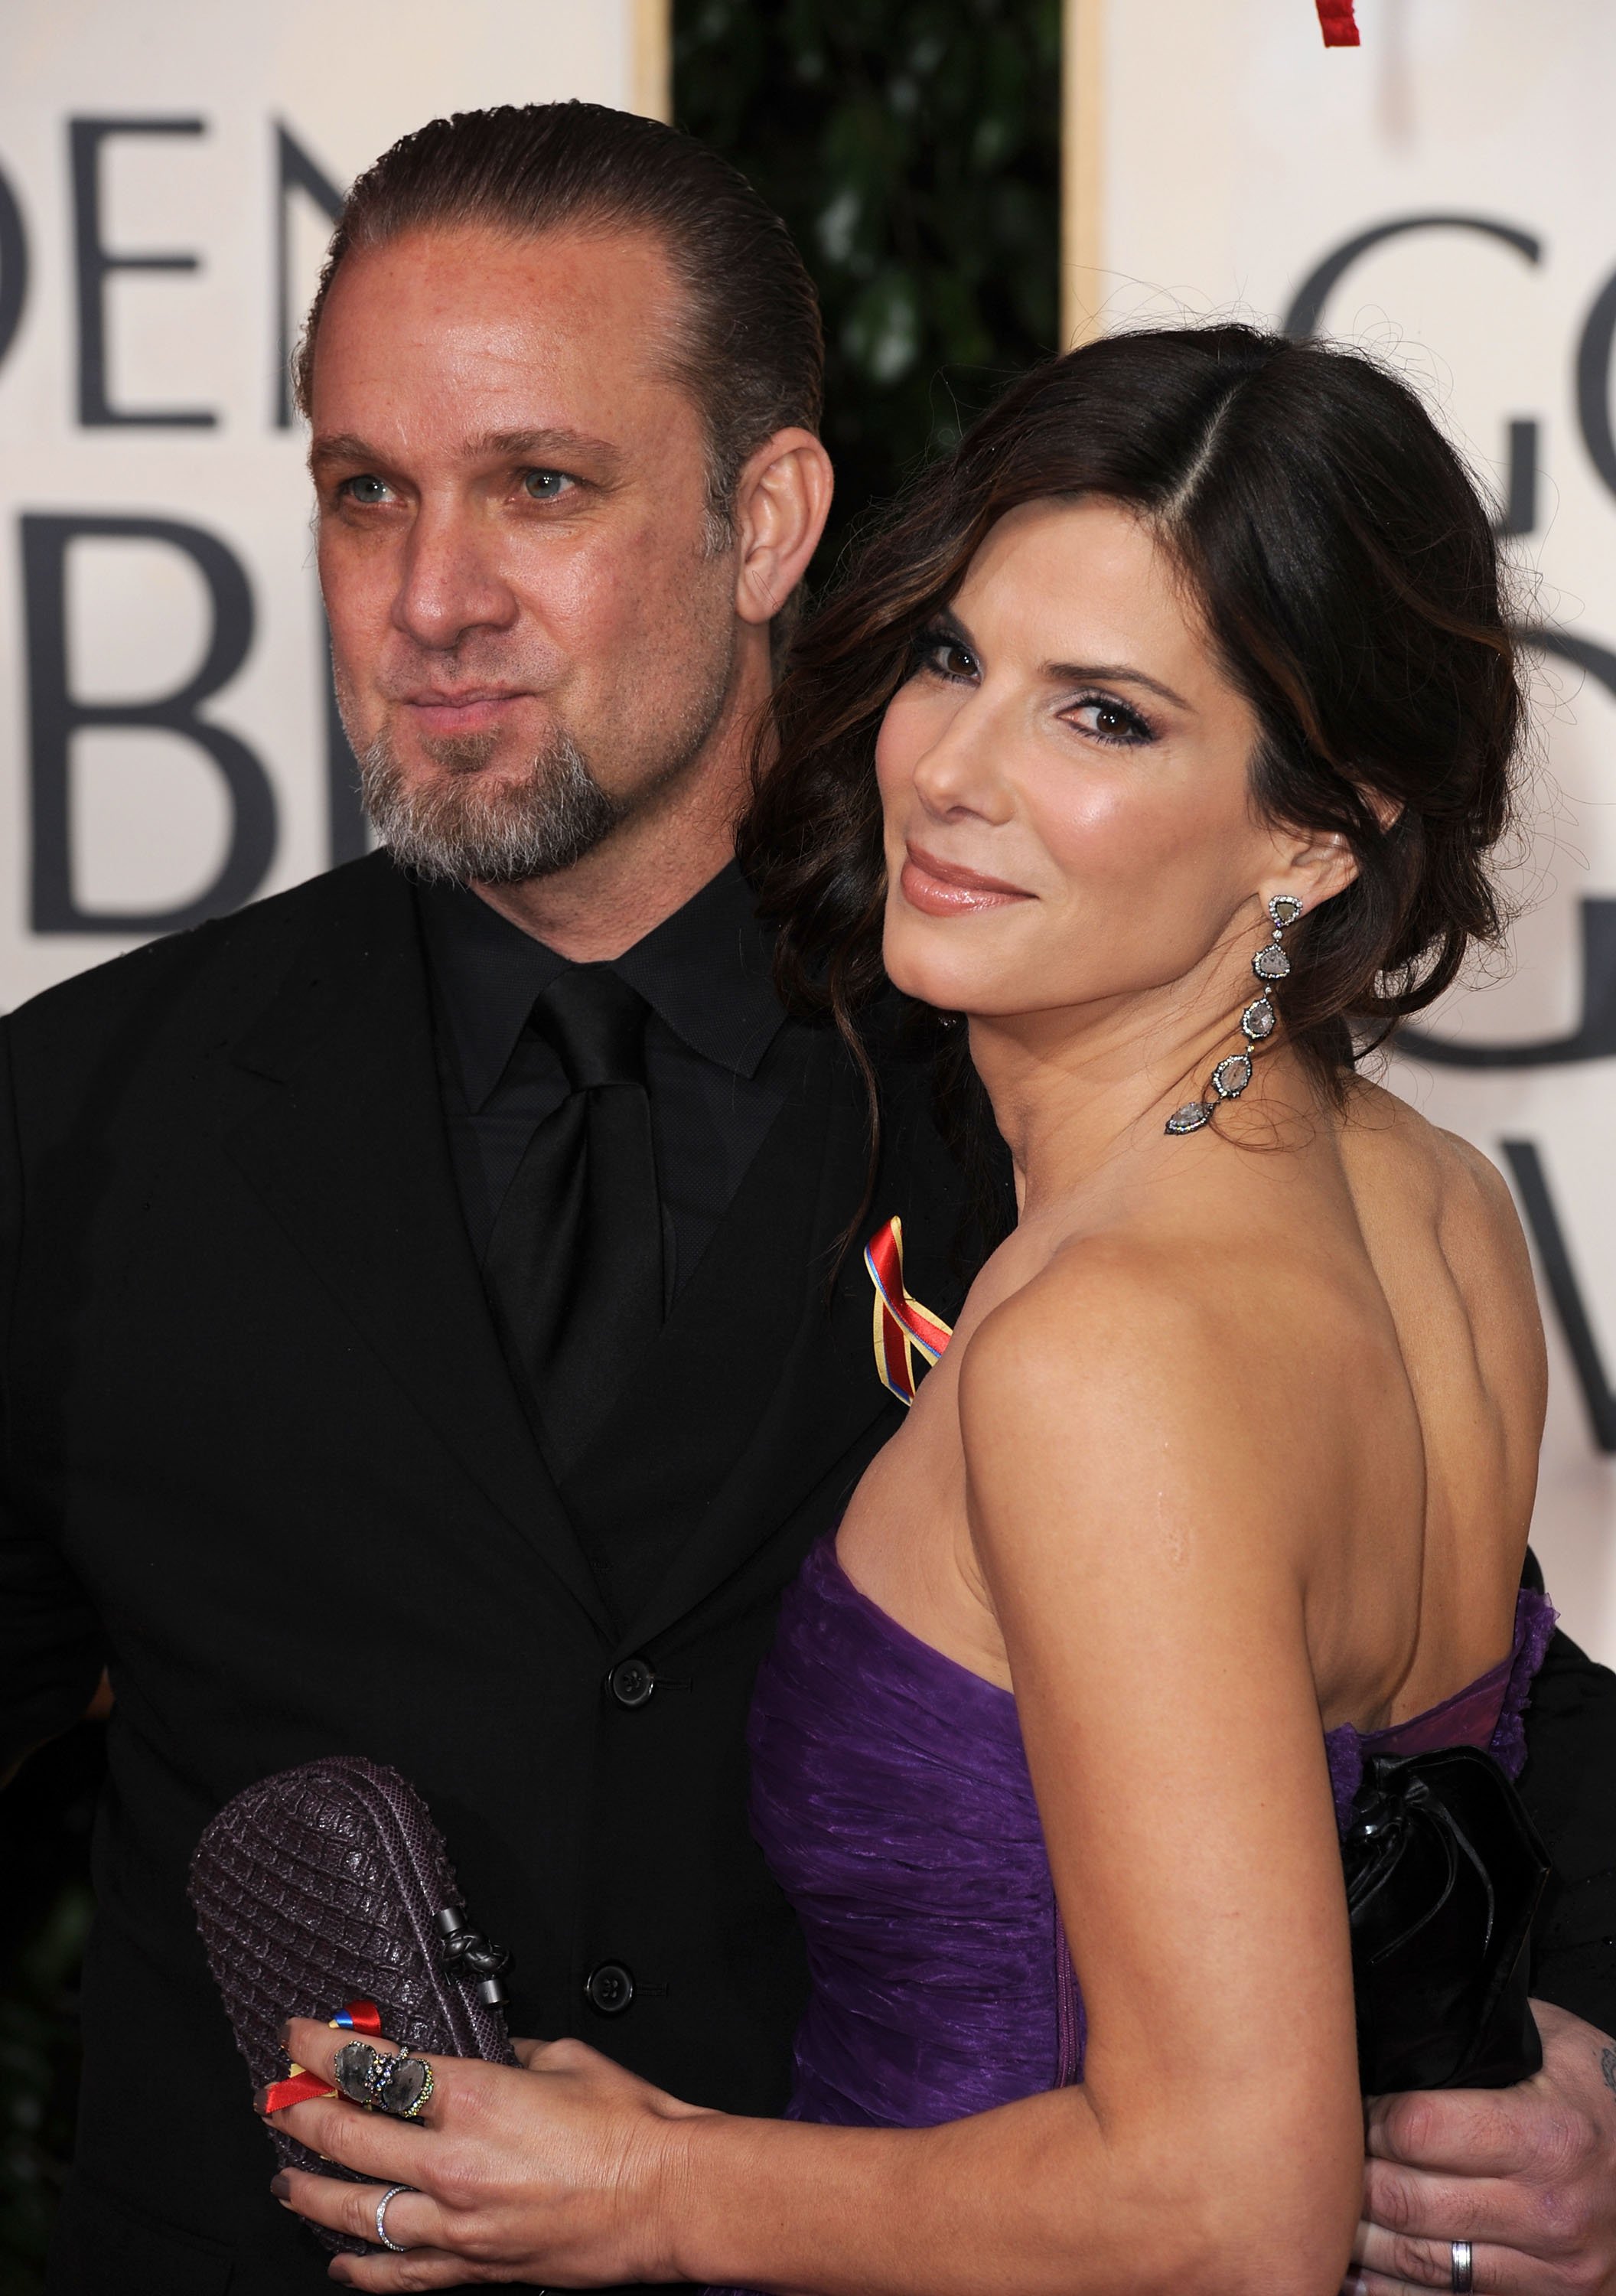 Jesse James and wife Sandra Bullock arriving at the 67th Annual Golden Globe Awards at The Beverly Hilton Hotel on January 17, 2010 in Beverly Hills, California. | Source: Getty Images